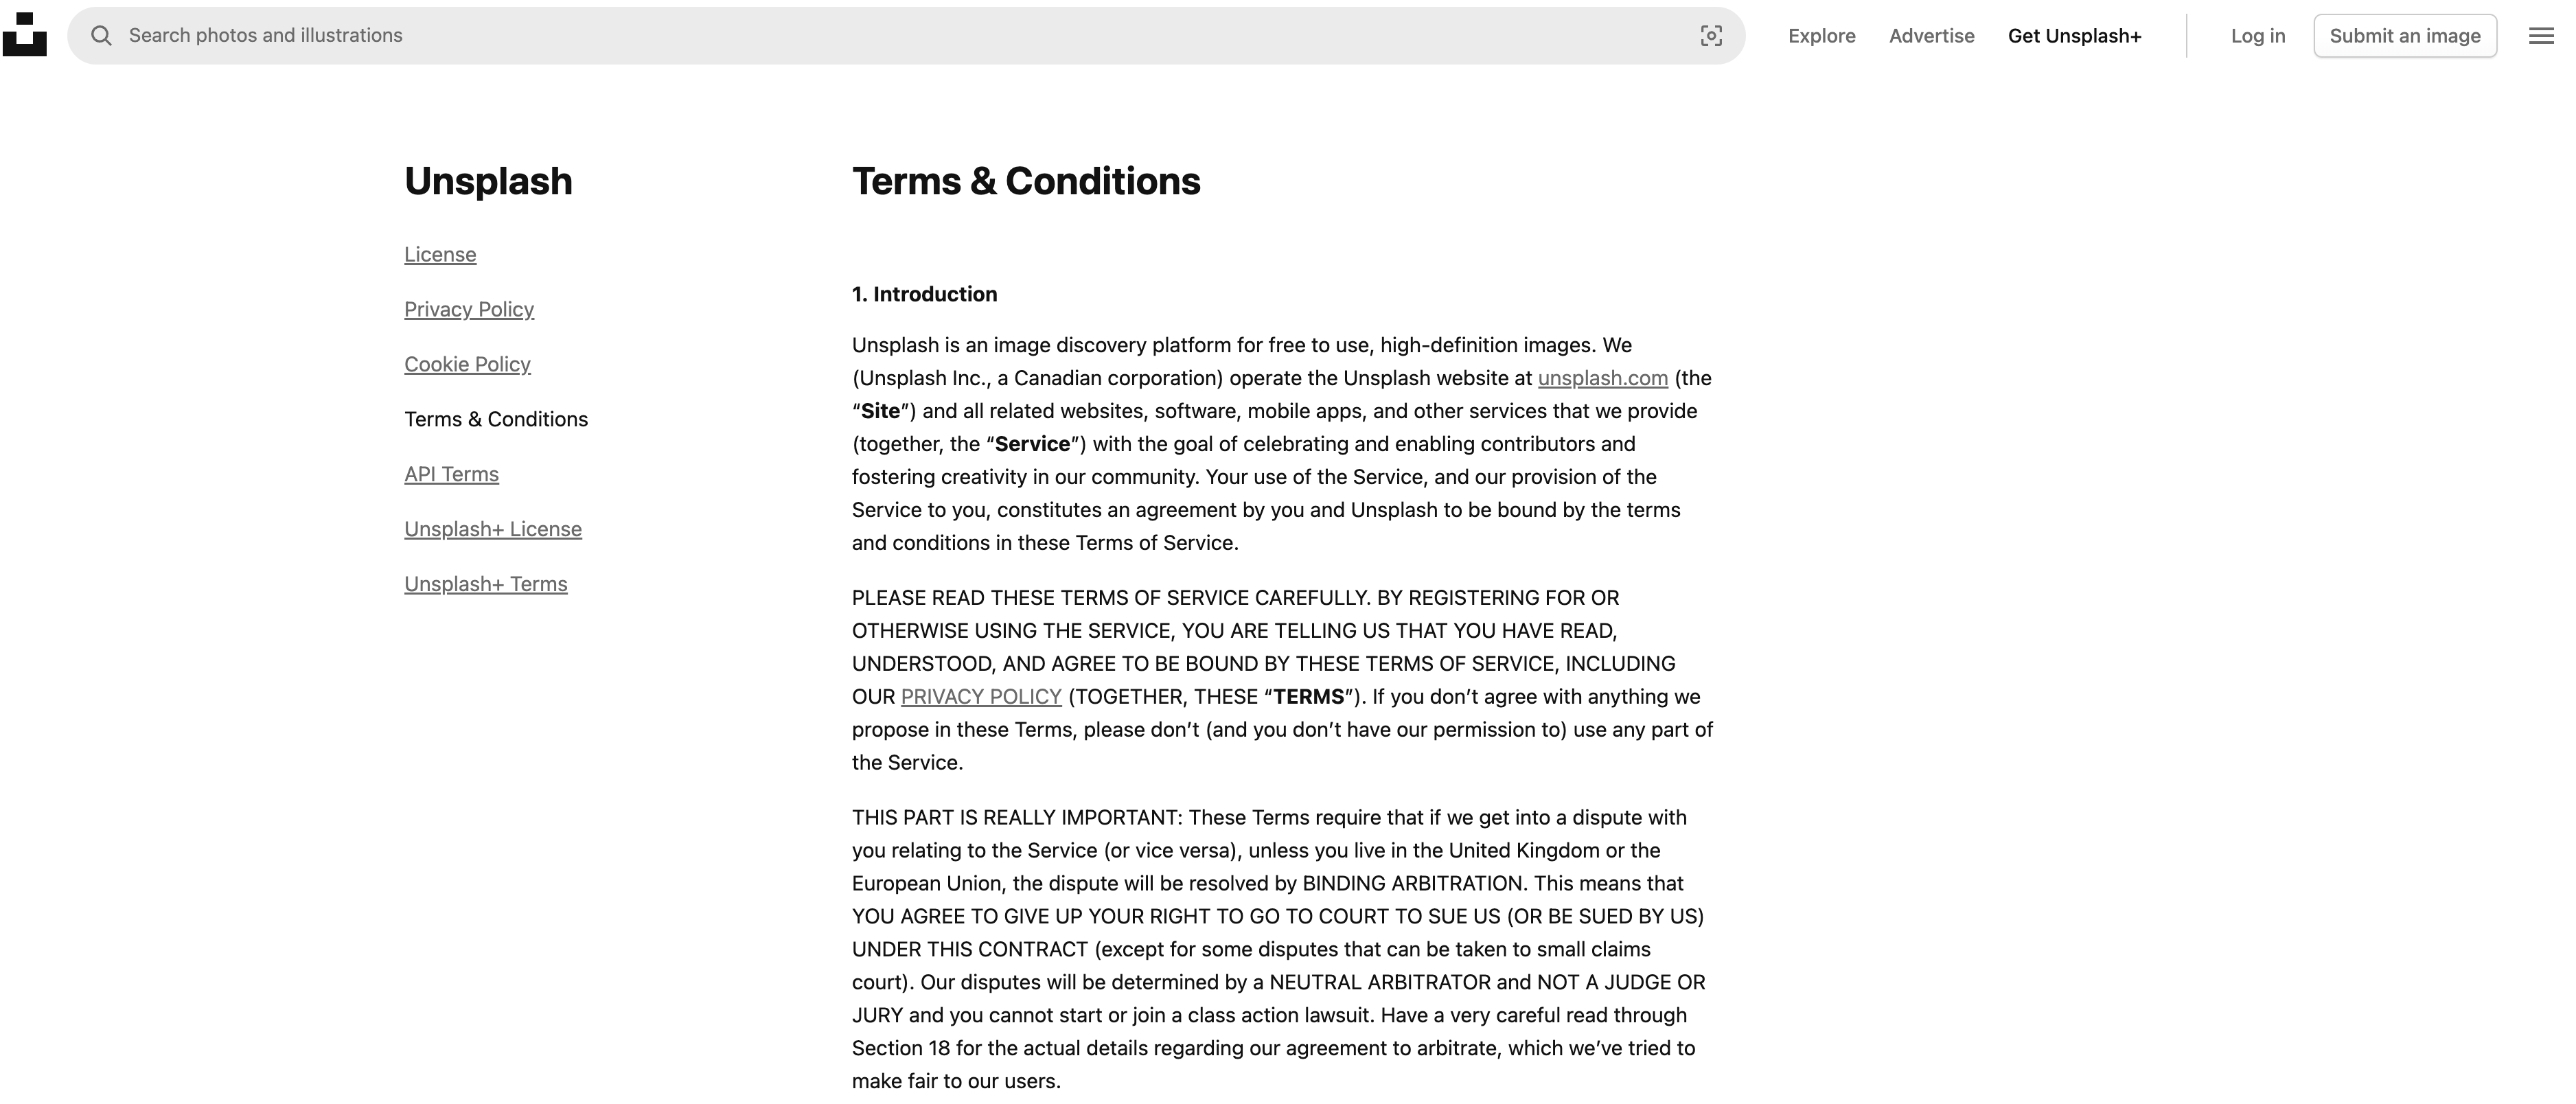 unsplash terms and conditions